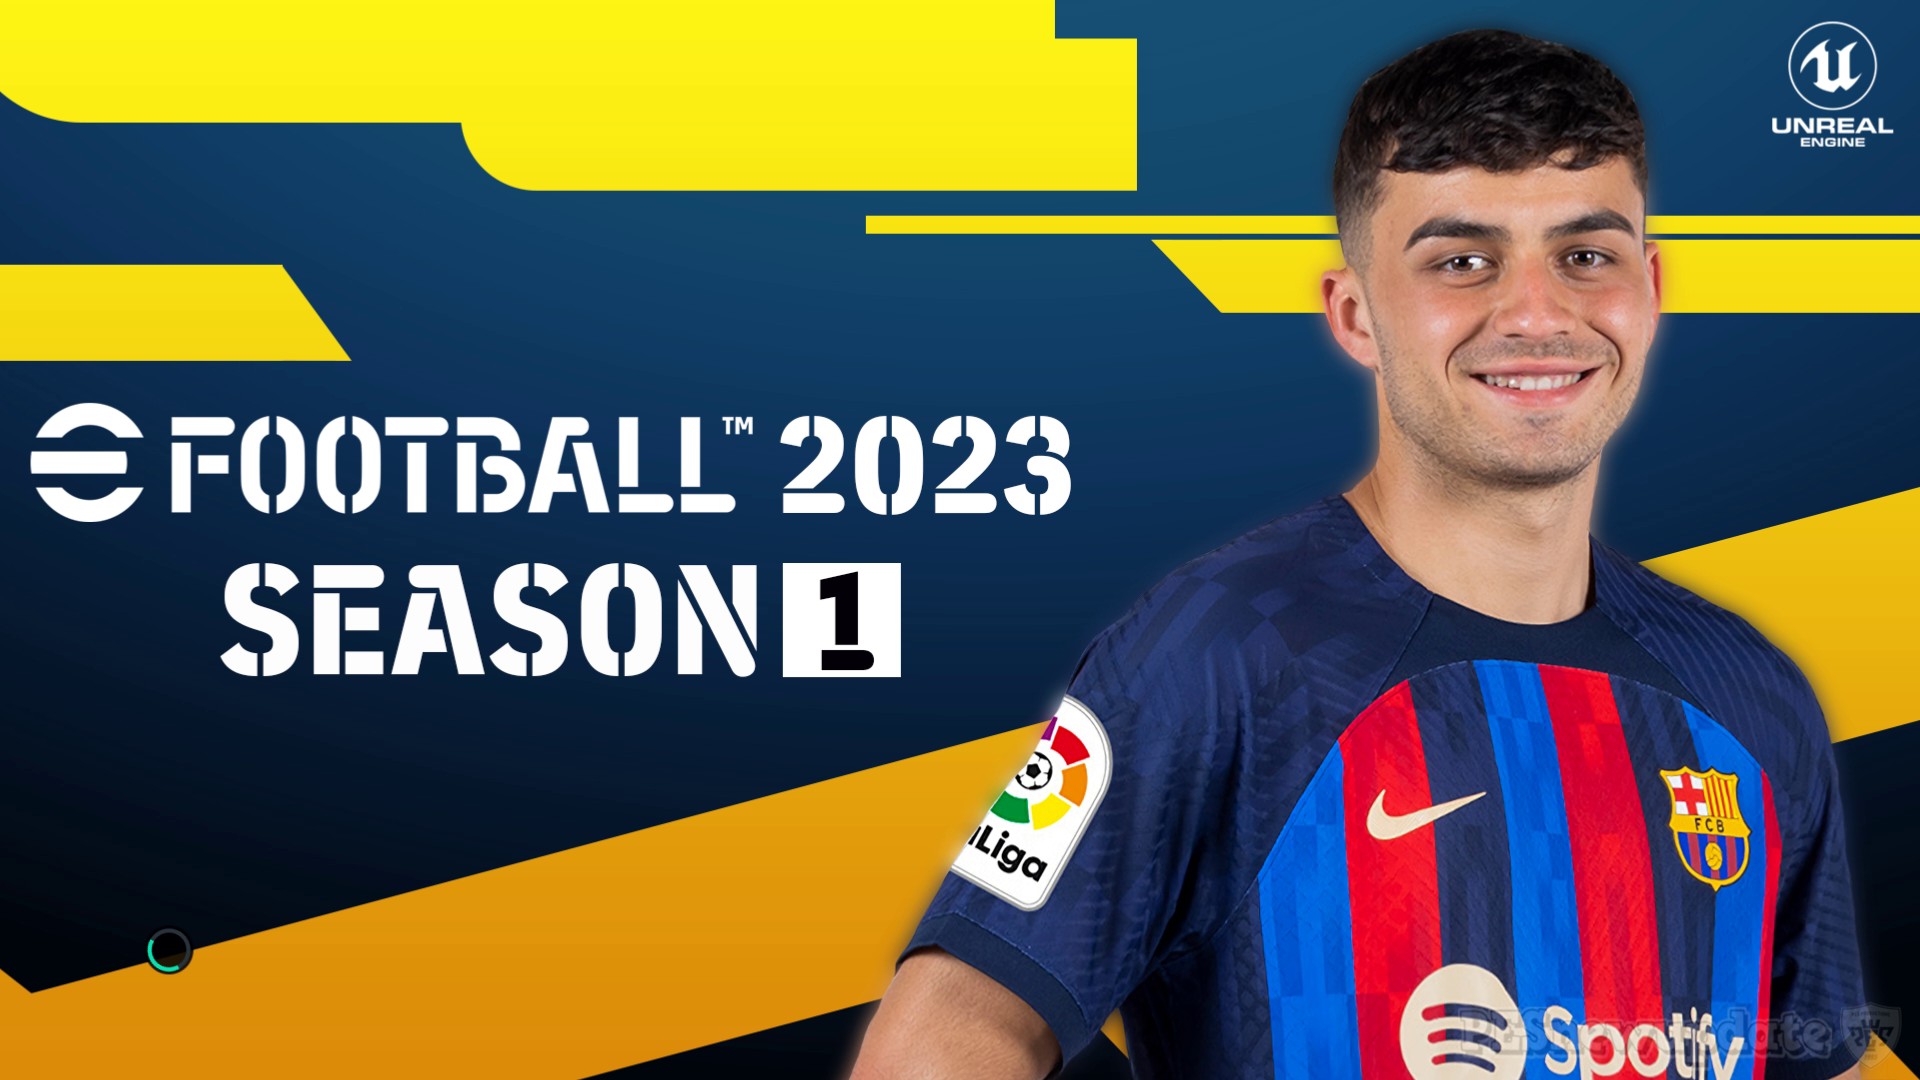 eFootball 2023 SEASON 1 CONCEPT Menu for PES 2021 by PESNewupdate PESNewupdate.com. Free Download Latest Pro Evolution Soccer Patch & Updates